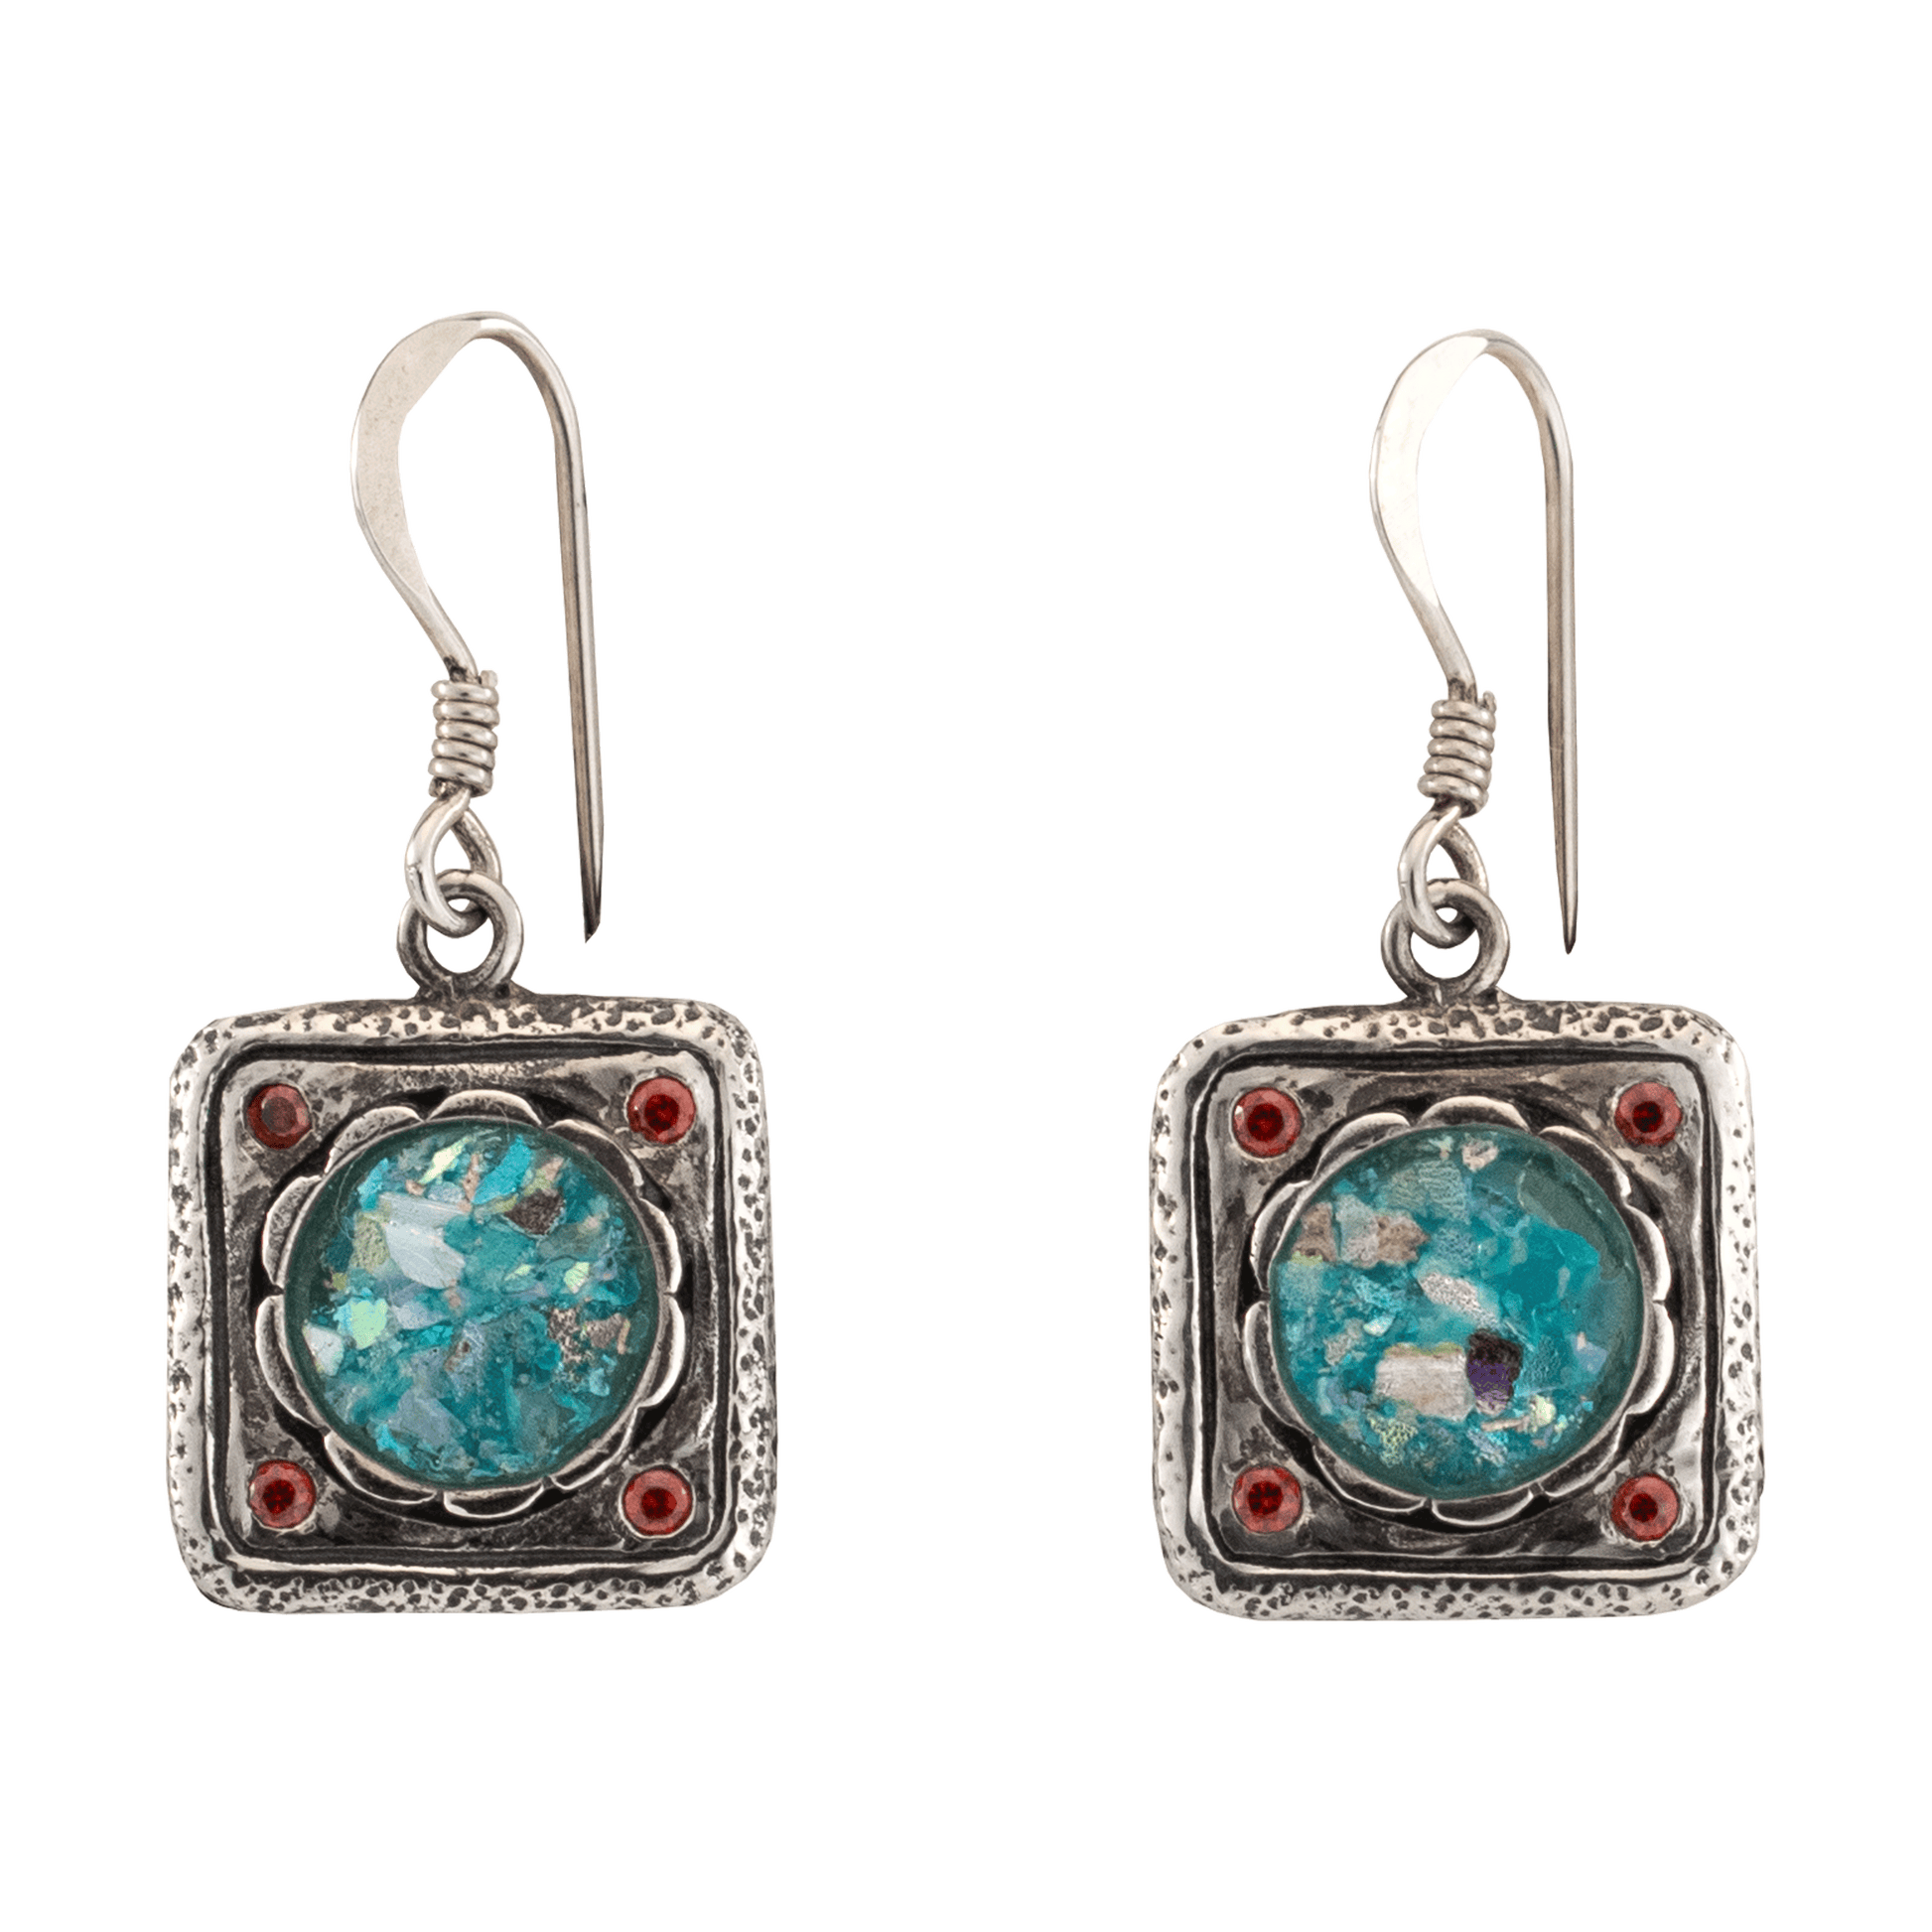 Round Roman Glass held by silver square with small petals and red jewels dangle earrings